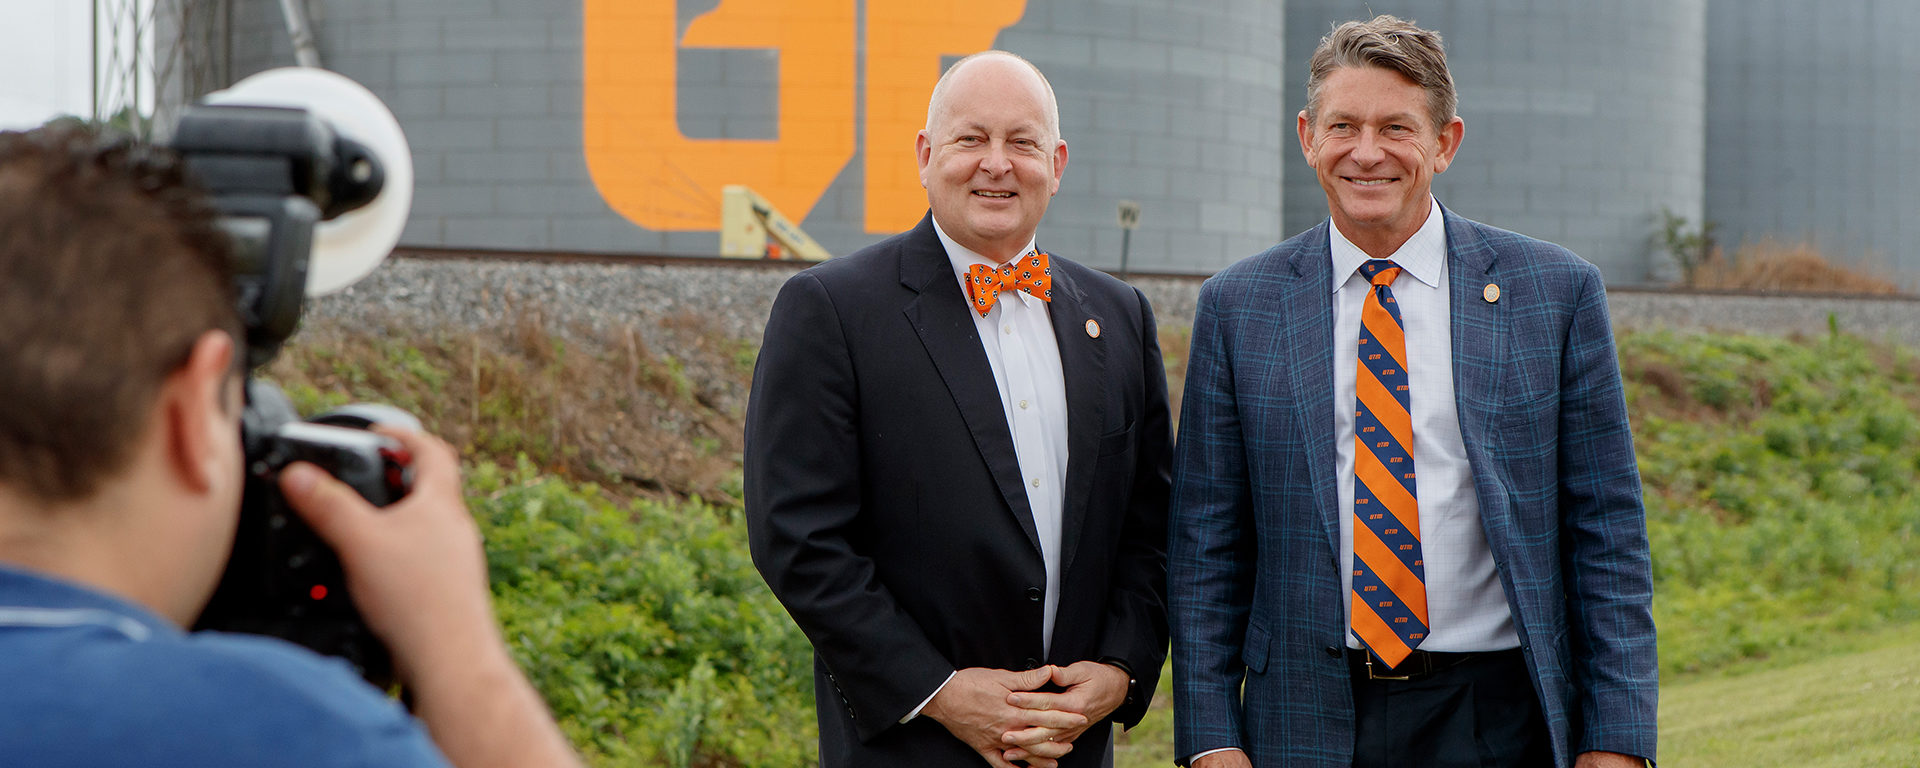 UT Martin Chancellor Keith Carver and UT President Randy Boyd are photographed in front of the “Everywhere You Look, UT” mural in Sharon. Since 2019, the University of Tennessee has been painting canvases across the state to remind passersby of UT’s presence in all 95 counties. To find mural locations or to nominate a space, visit https://everywhere.tennessee.edu/murals/. Photo By Sam Thomas